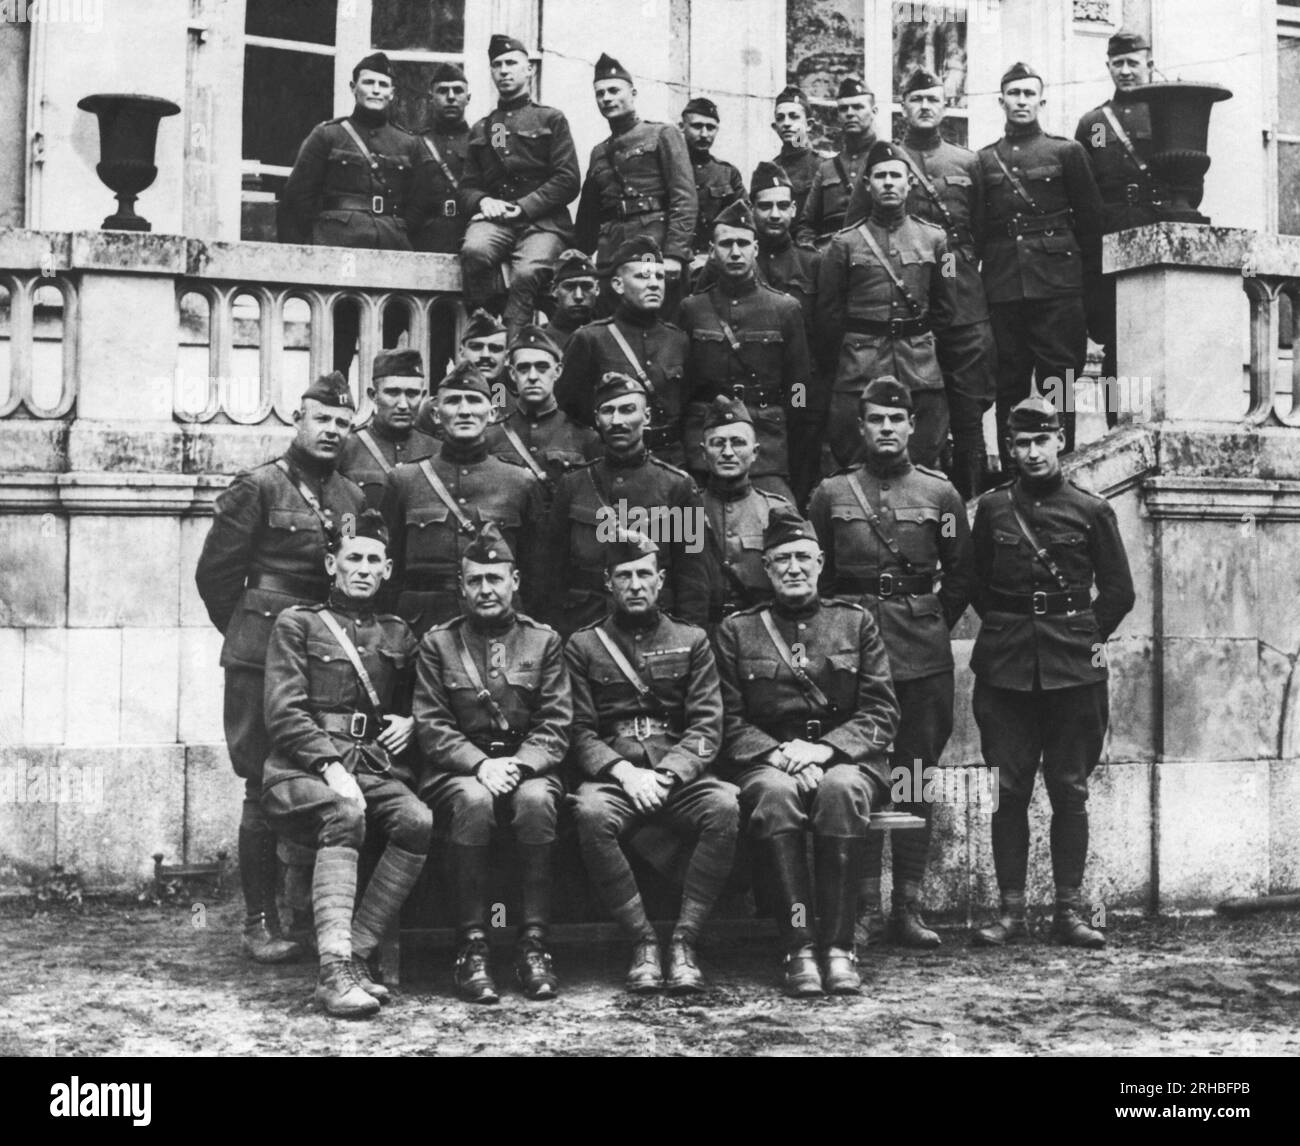 Chateau le Chenay, France:  April, 1919 Harry Truman (second row, third from right) posed with his fellow soldiers of the 129th Field Arilllery unit during WWI. Stock Photo